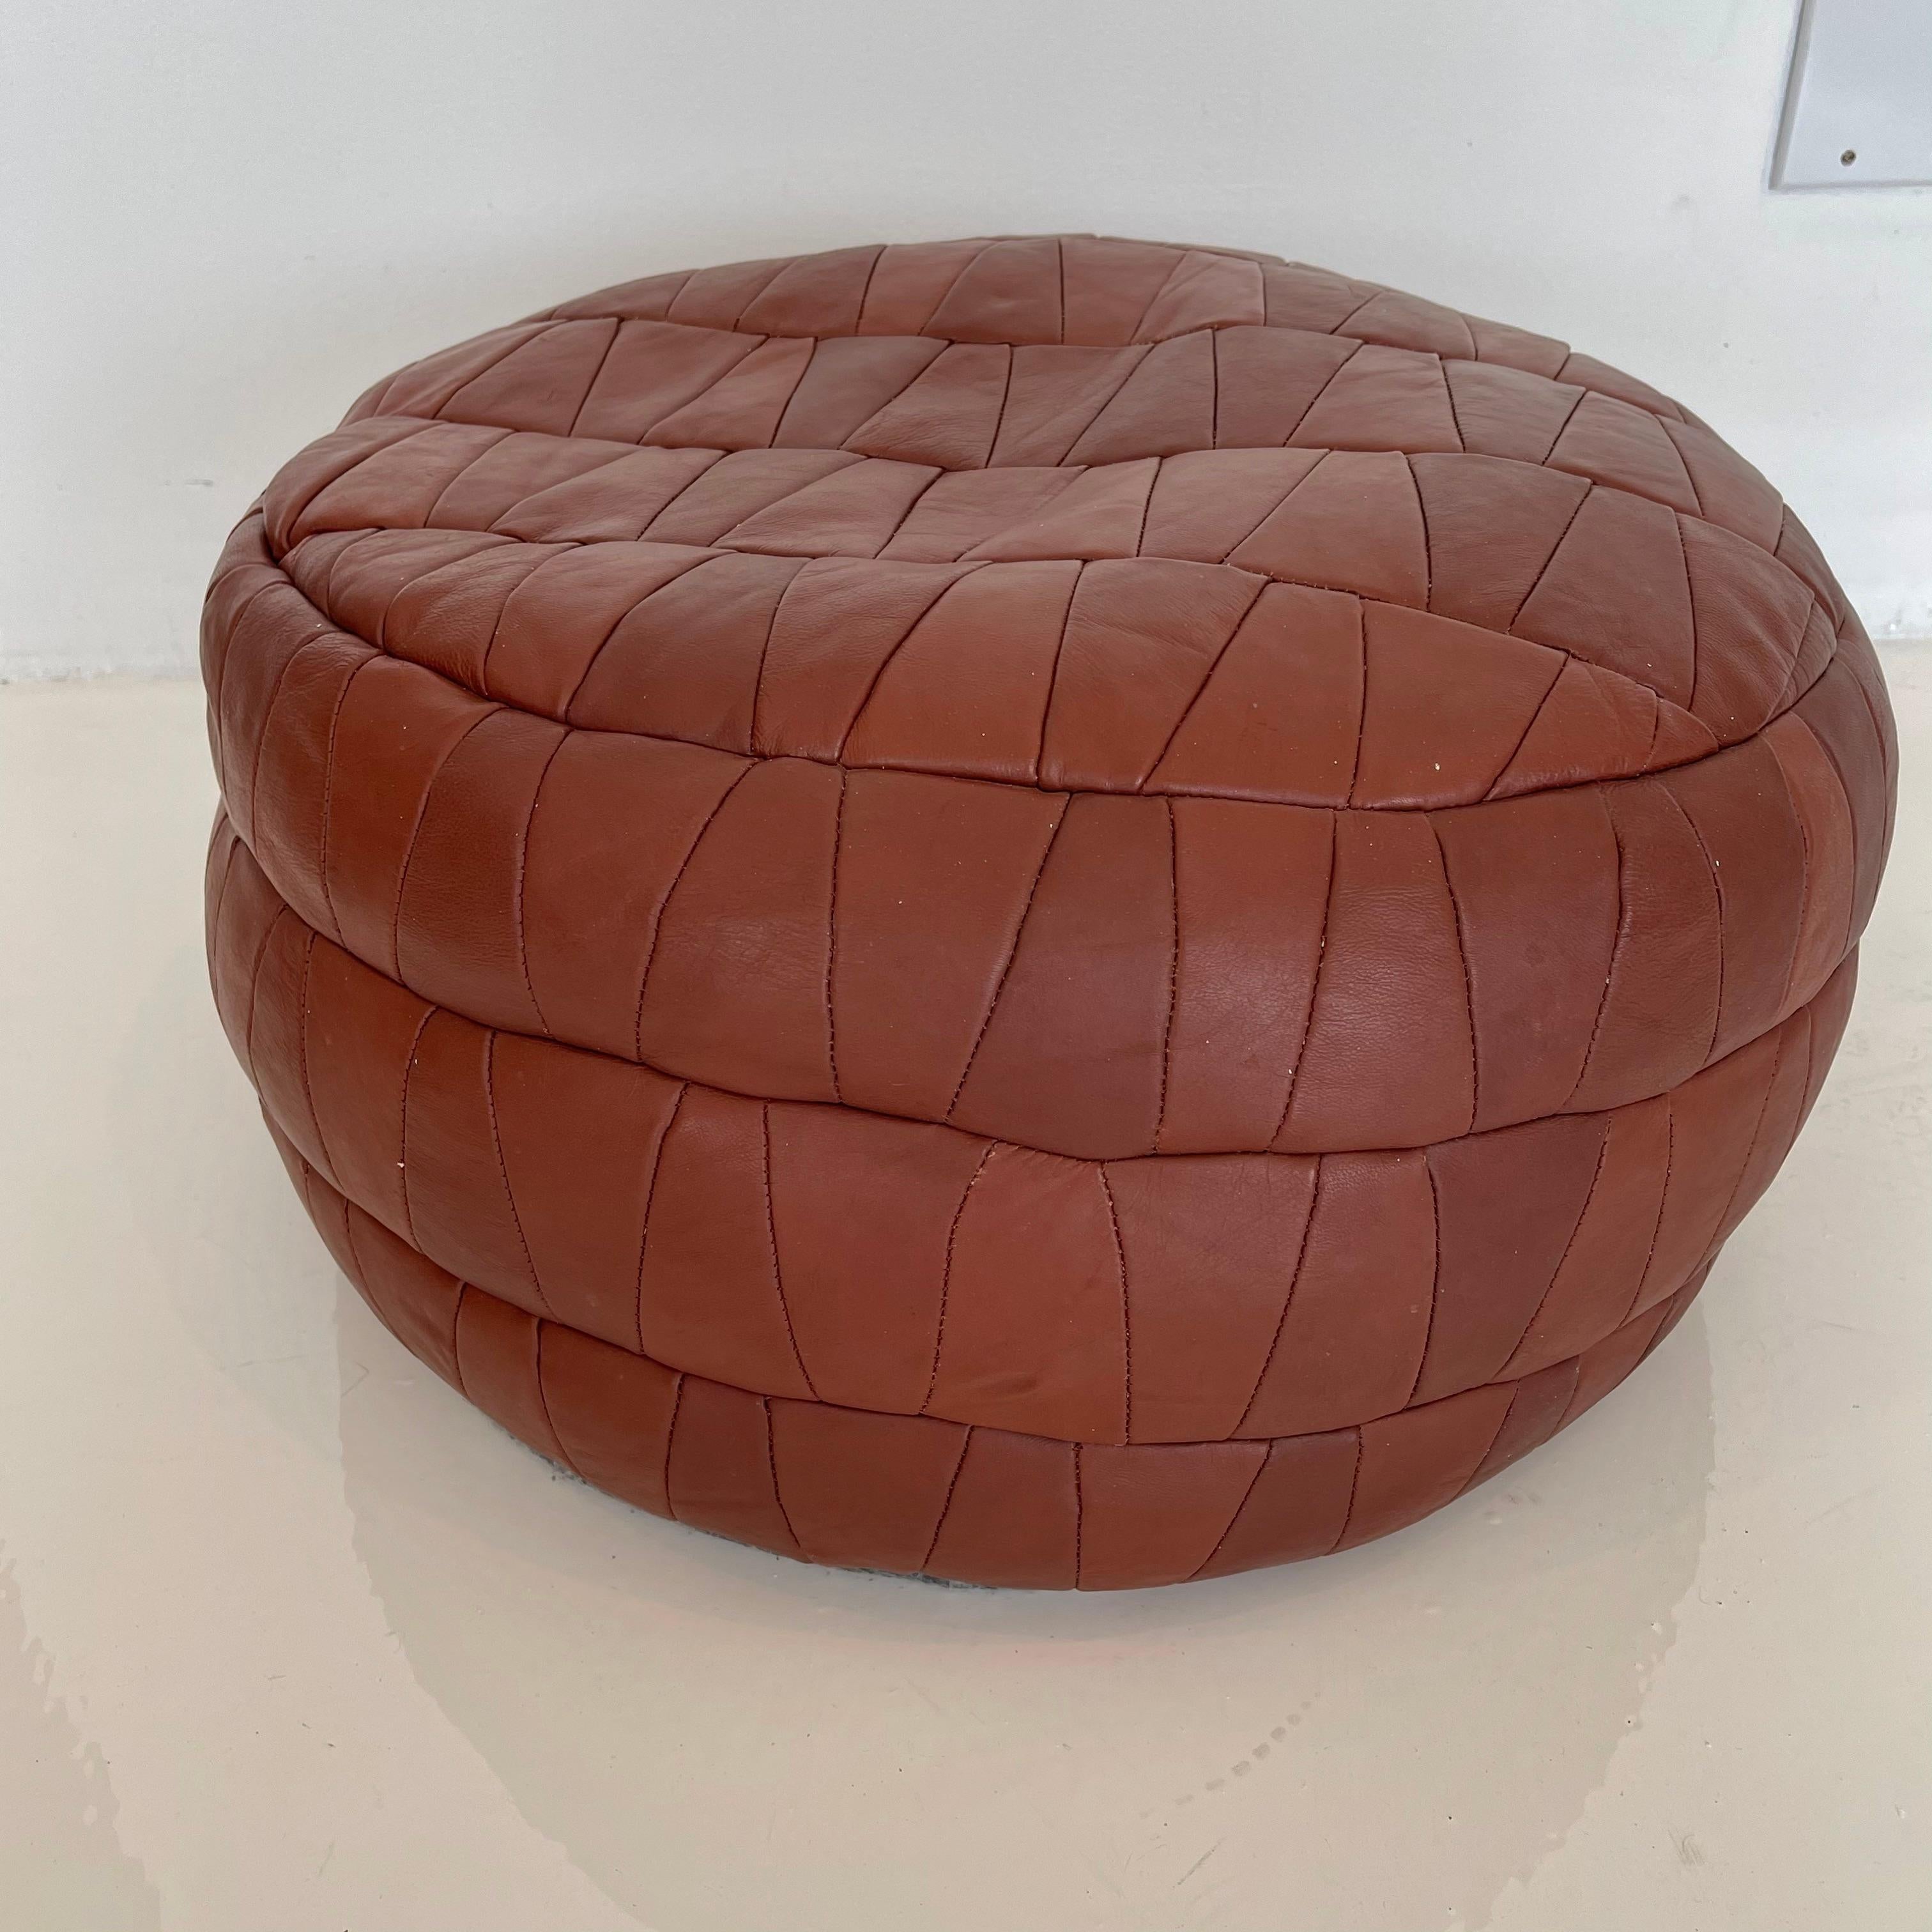 Gorgeous whiskey leather poufs by Swiss designer De Sede. Triangular patchwork design. Great vintage condition. Perfect accent piece. 

Two matching available. Priced individually.